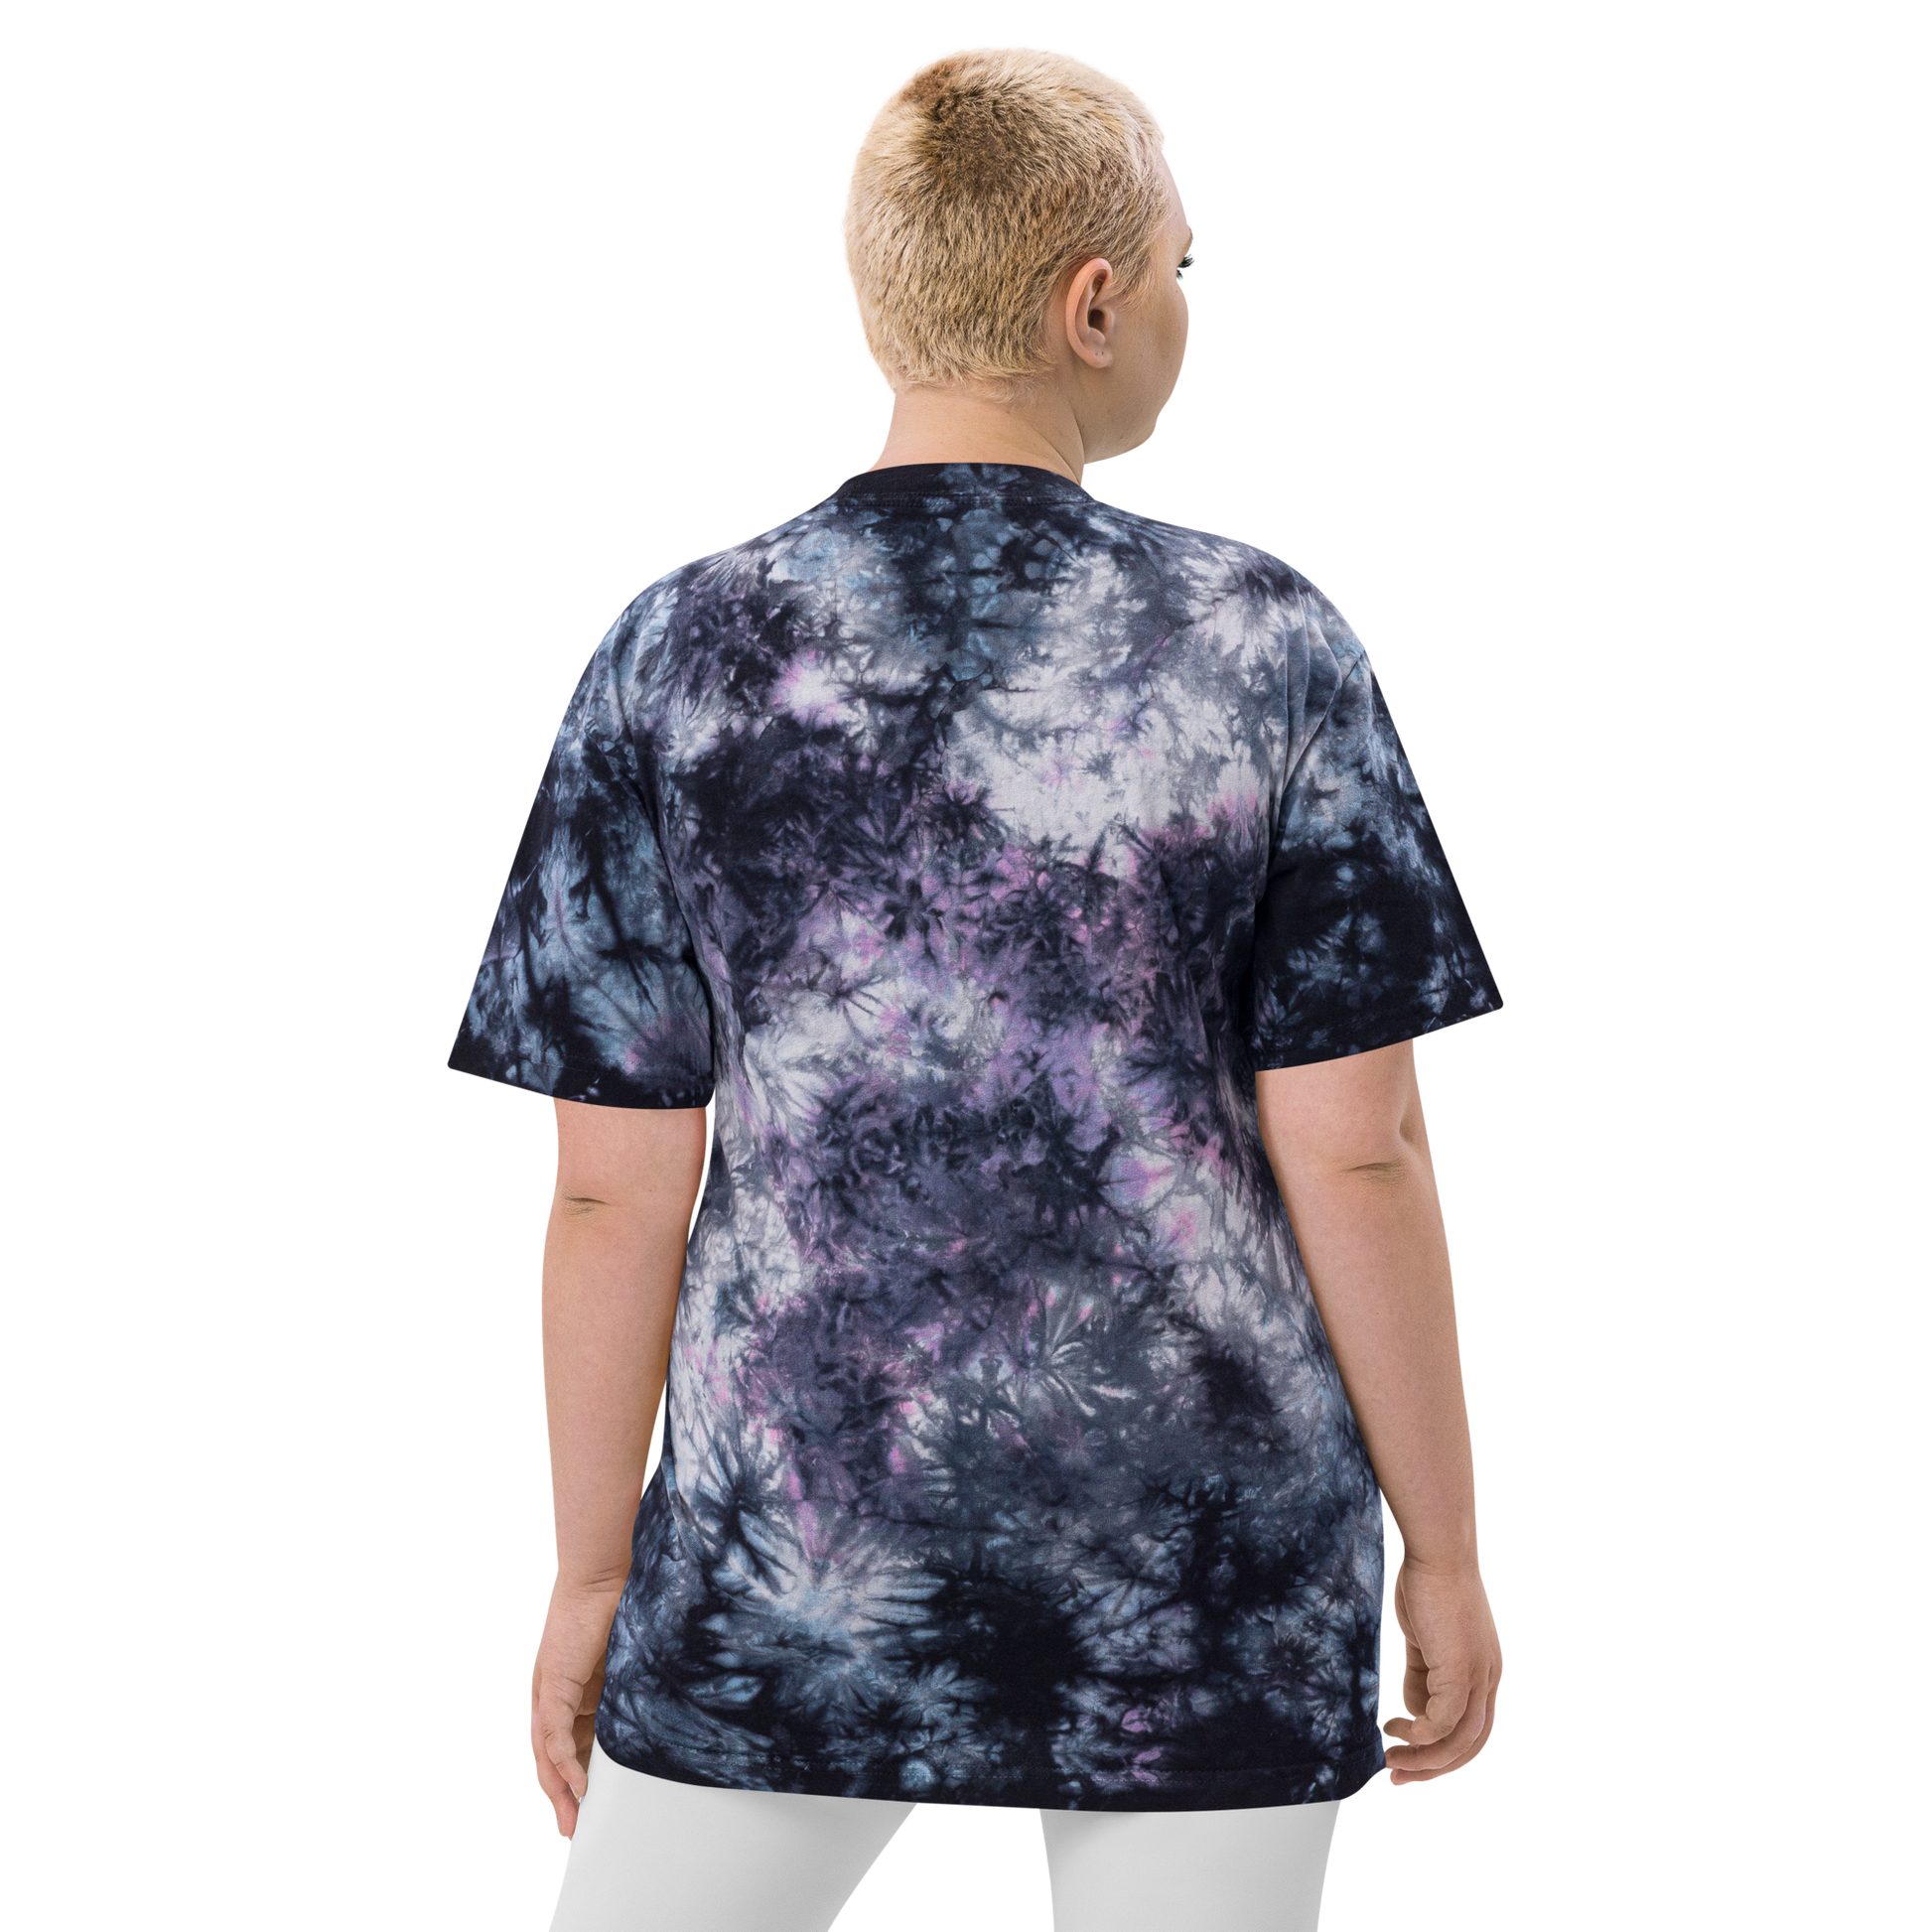 YHM Designs - YQG Windsor Oversized Tie-Dye T-Shirt - Crossed-X Design with Airport Code and Vintage Propliner - White Embroidery - Image 06